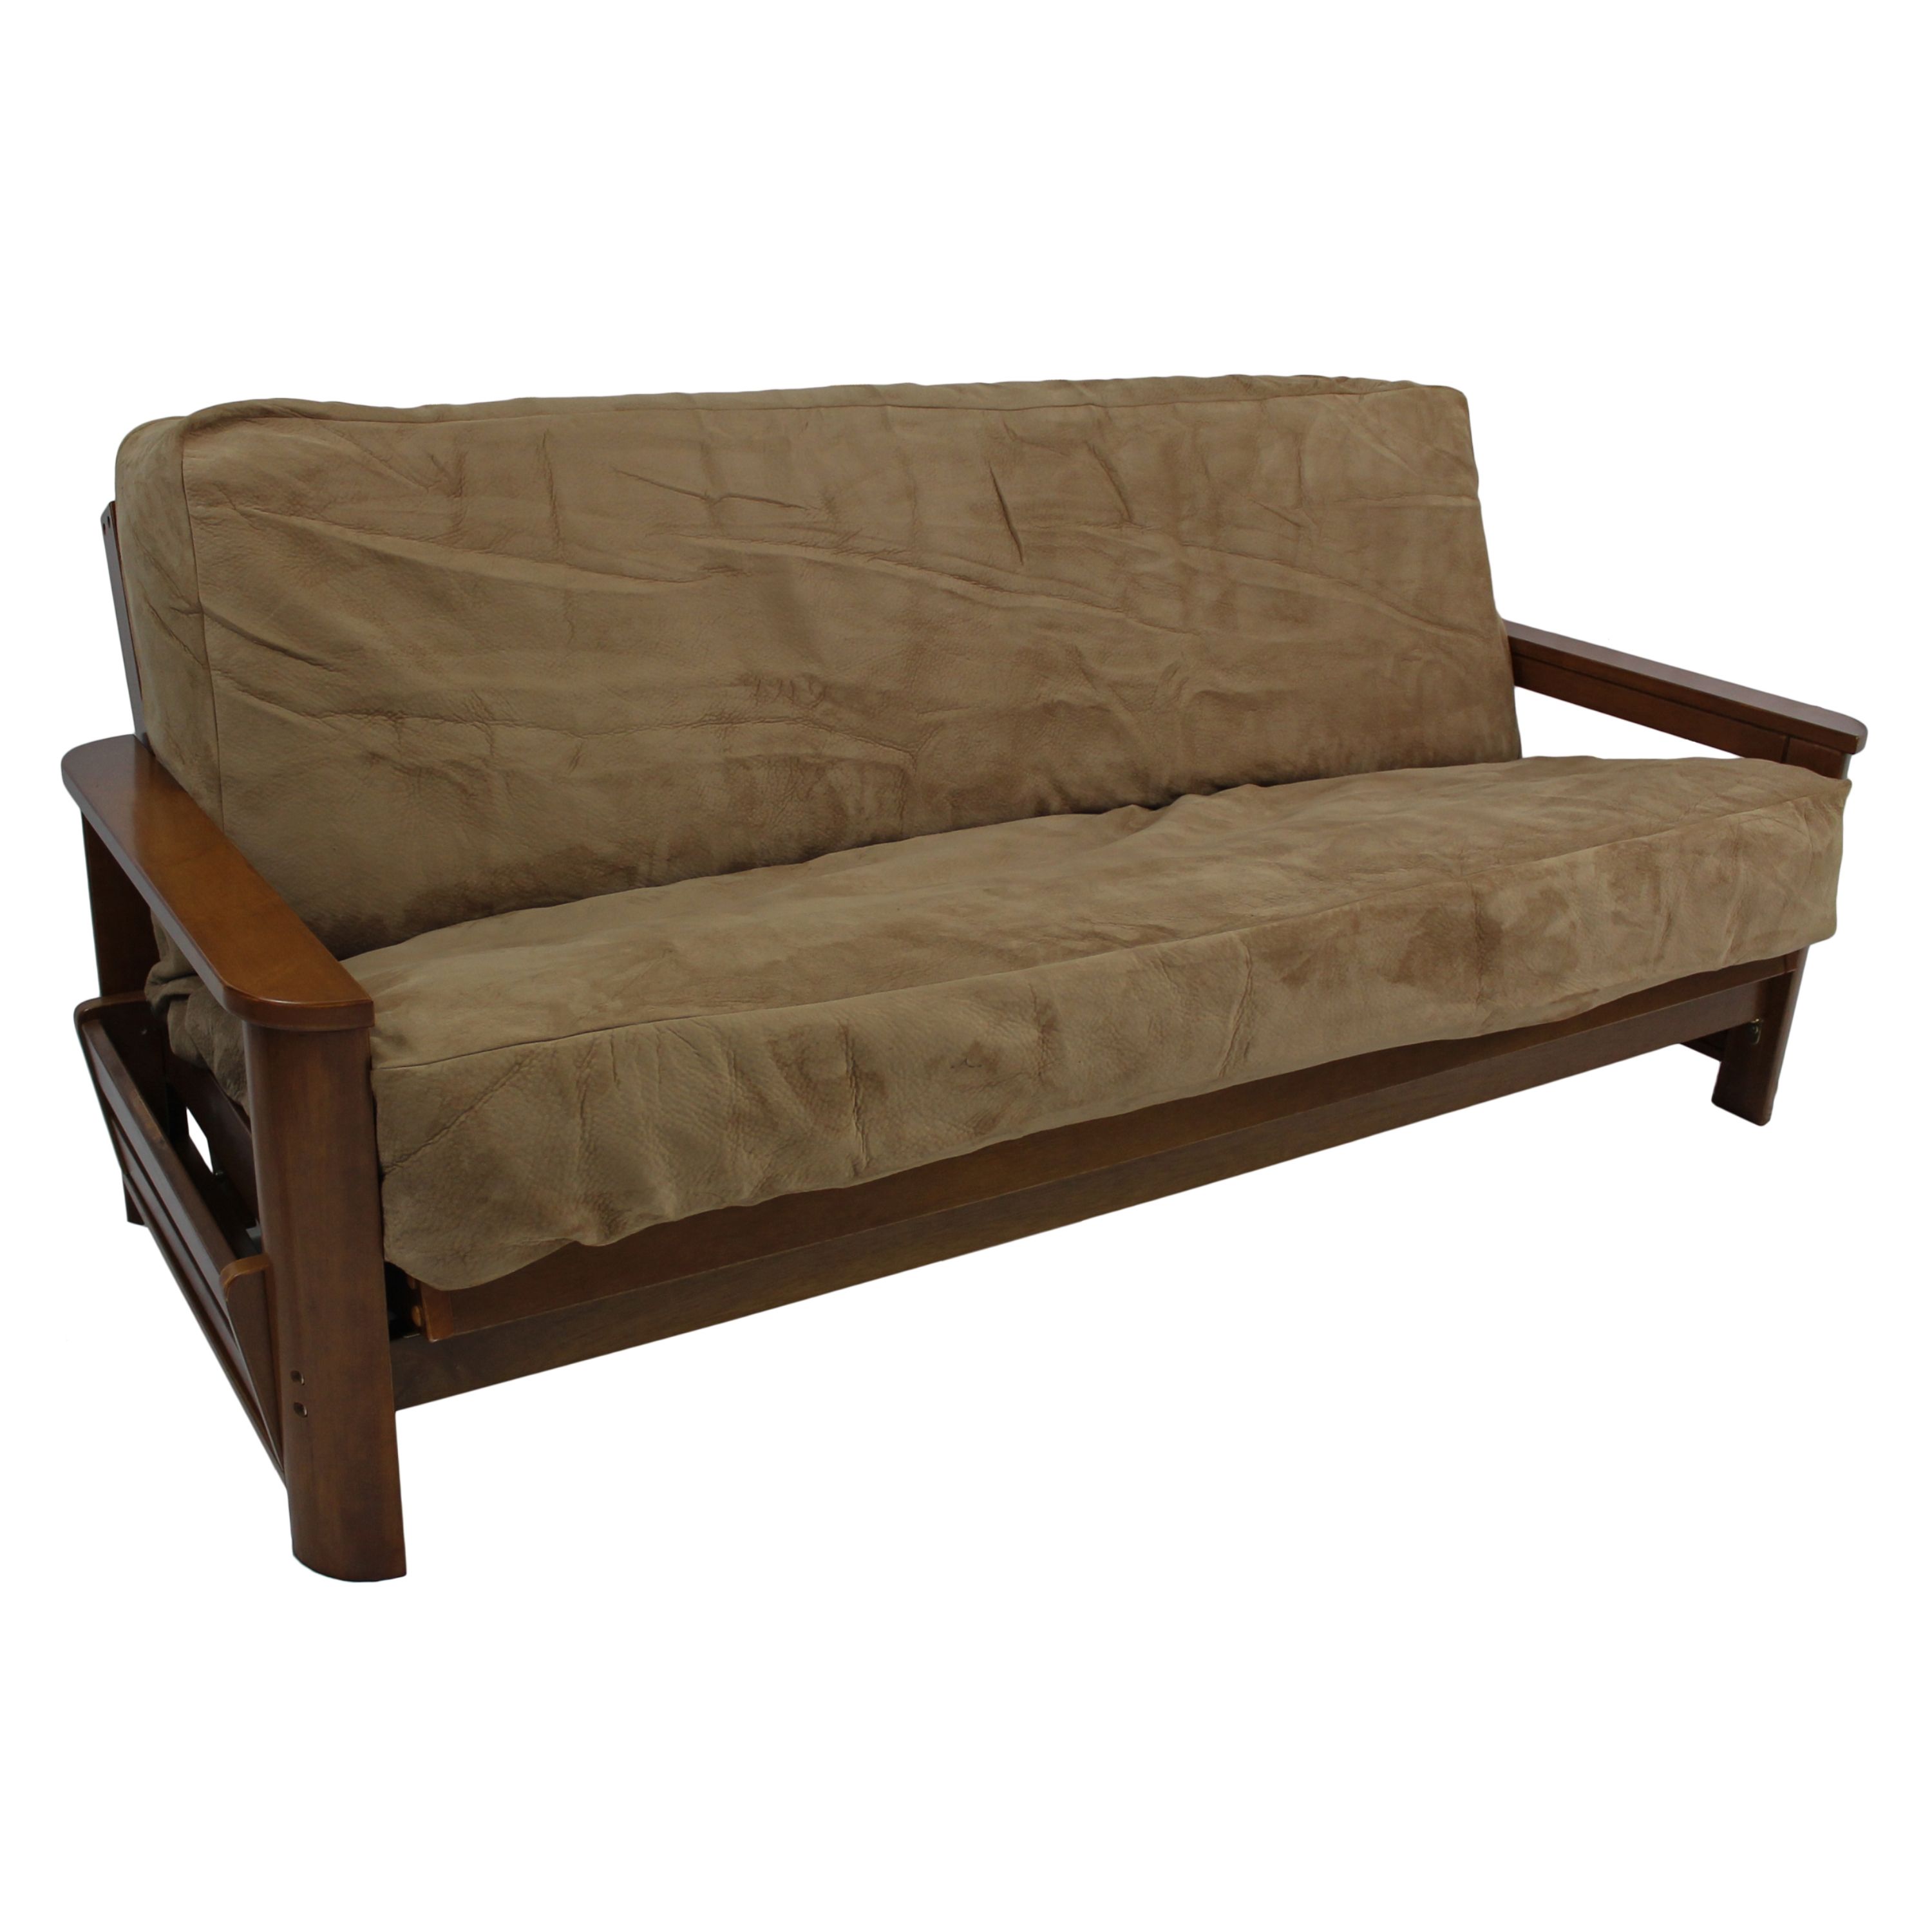 Blazing Needles Solid Foam-Backed Microsuede 8" to 9" Futon Cover, Full, Tan - image 1 of 5